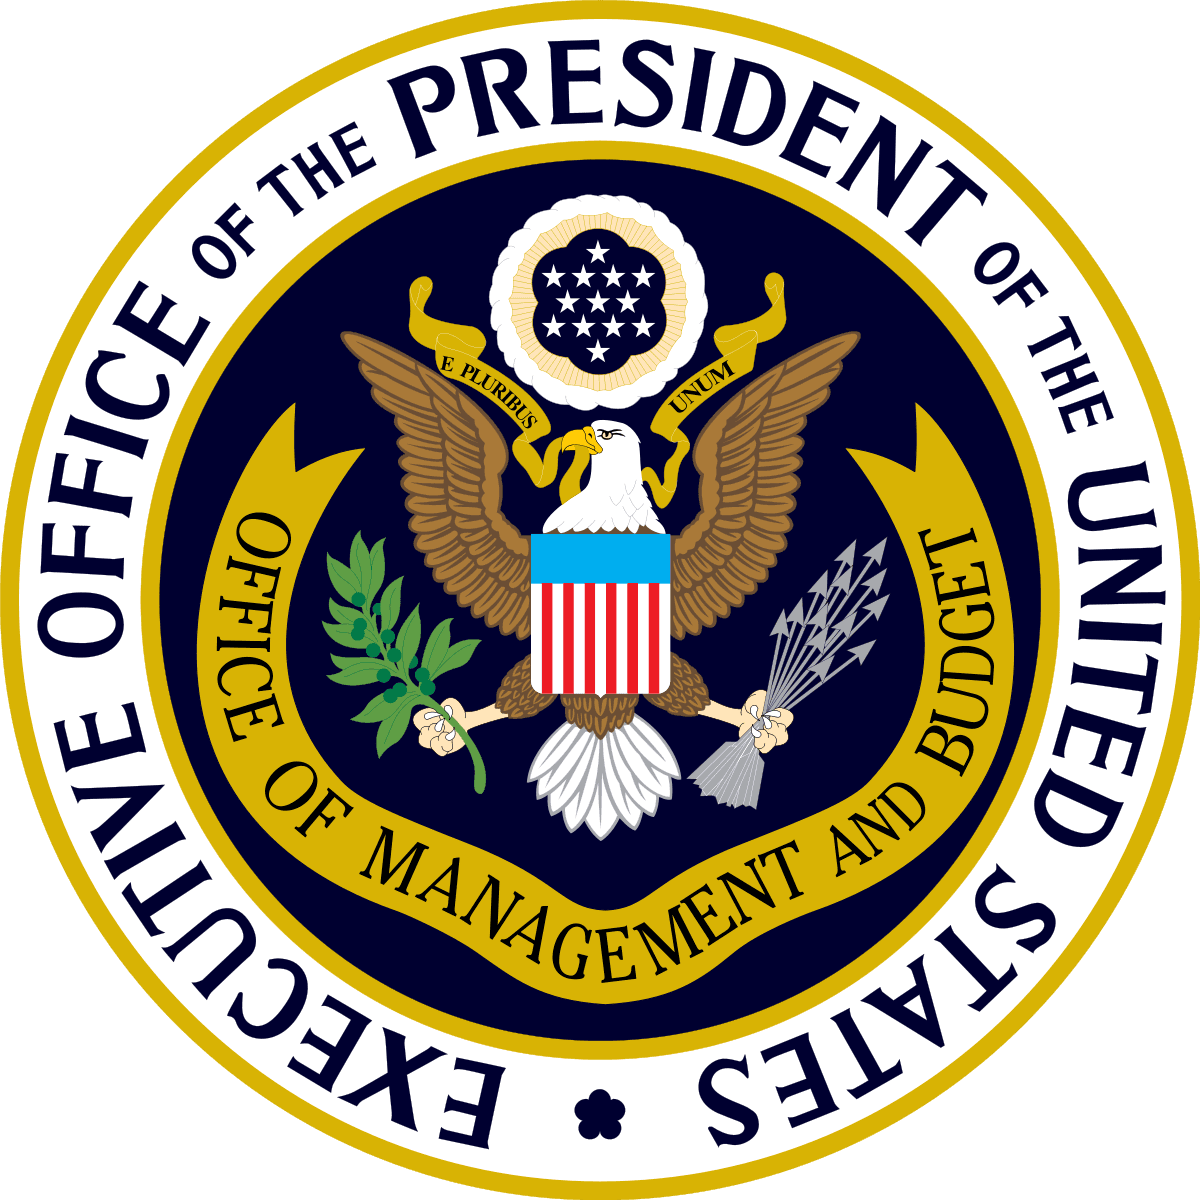 Executive Office of the President of the United States logo